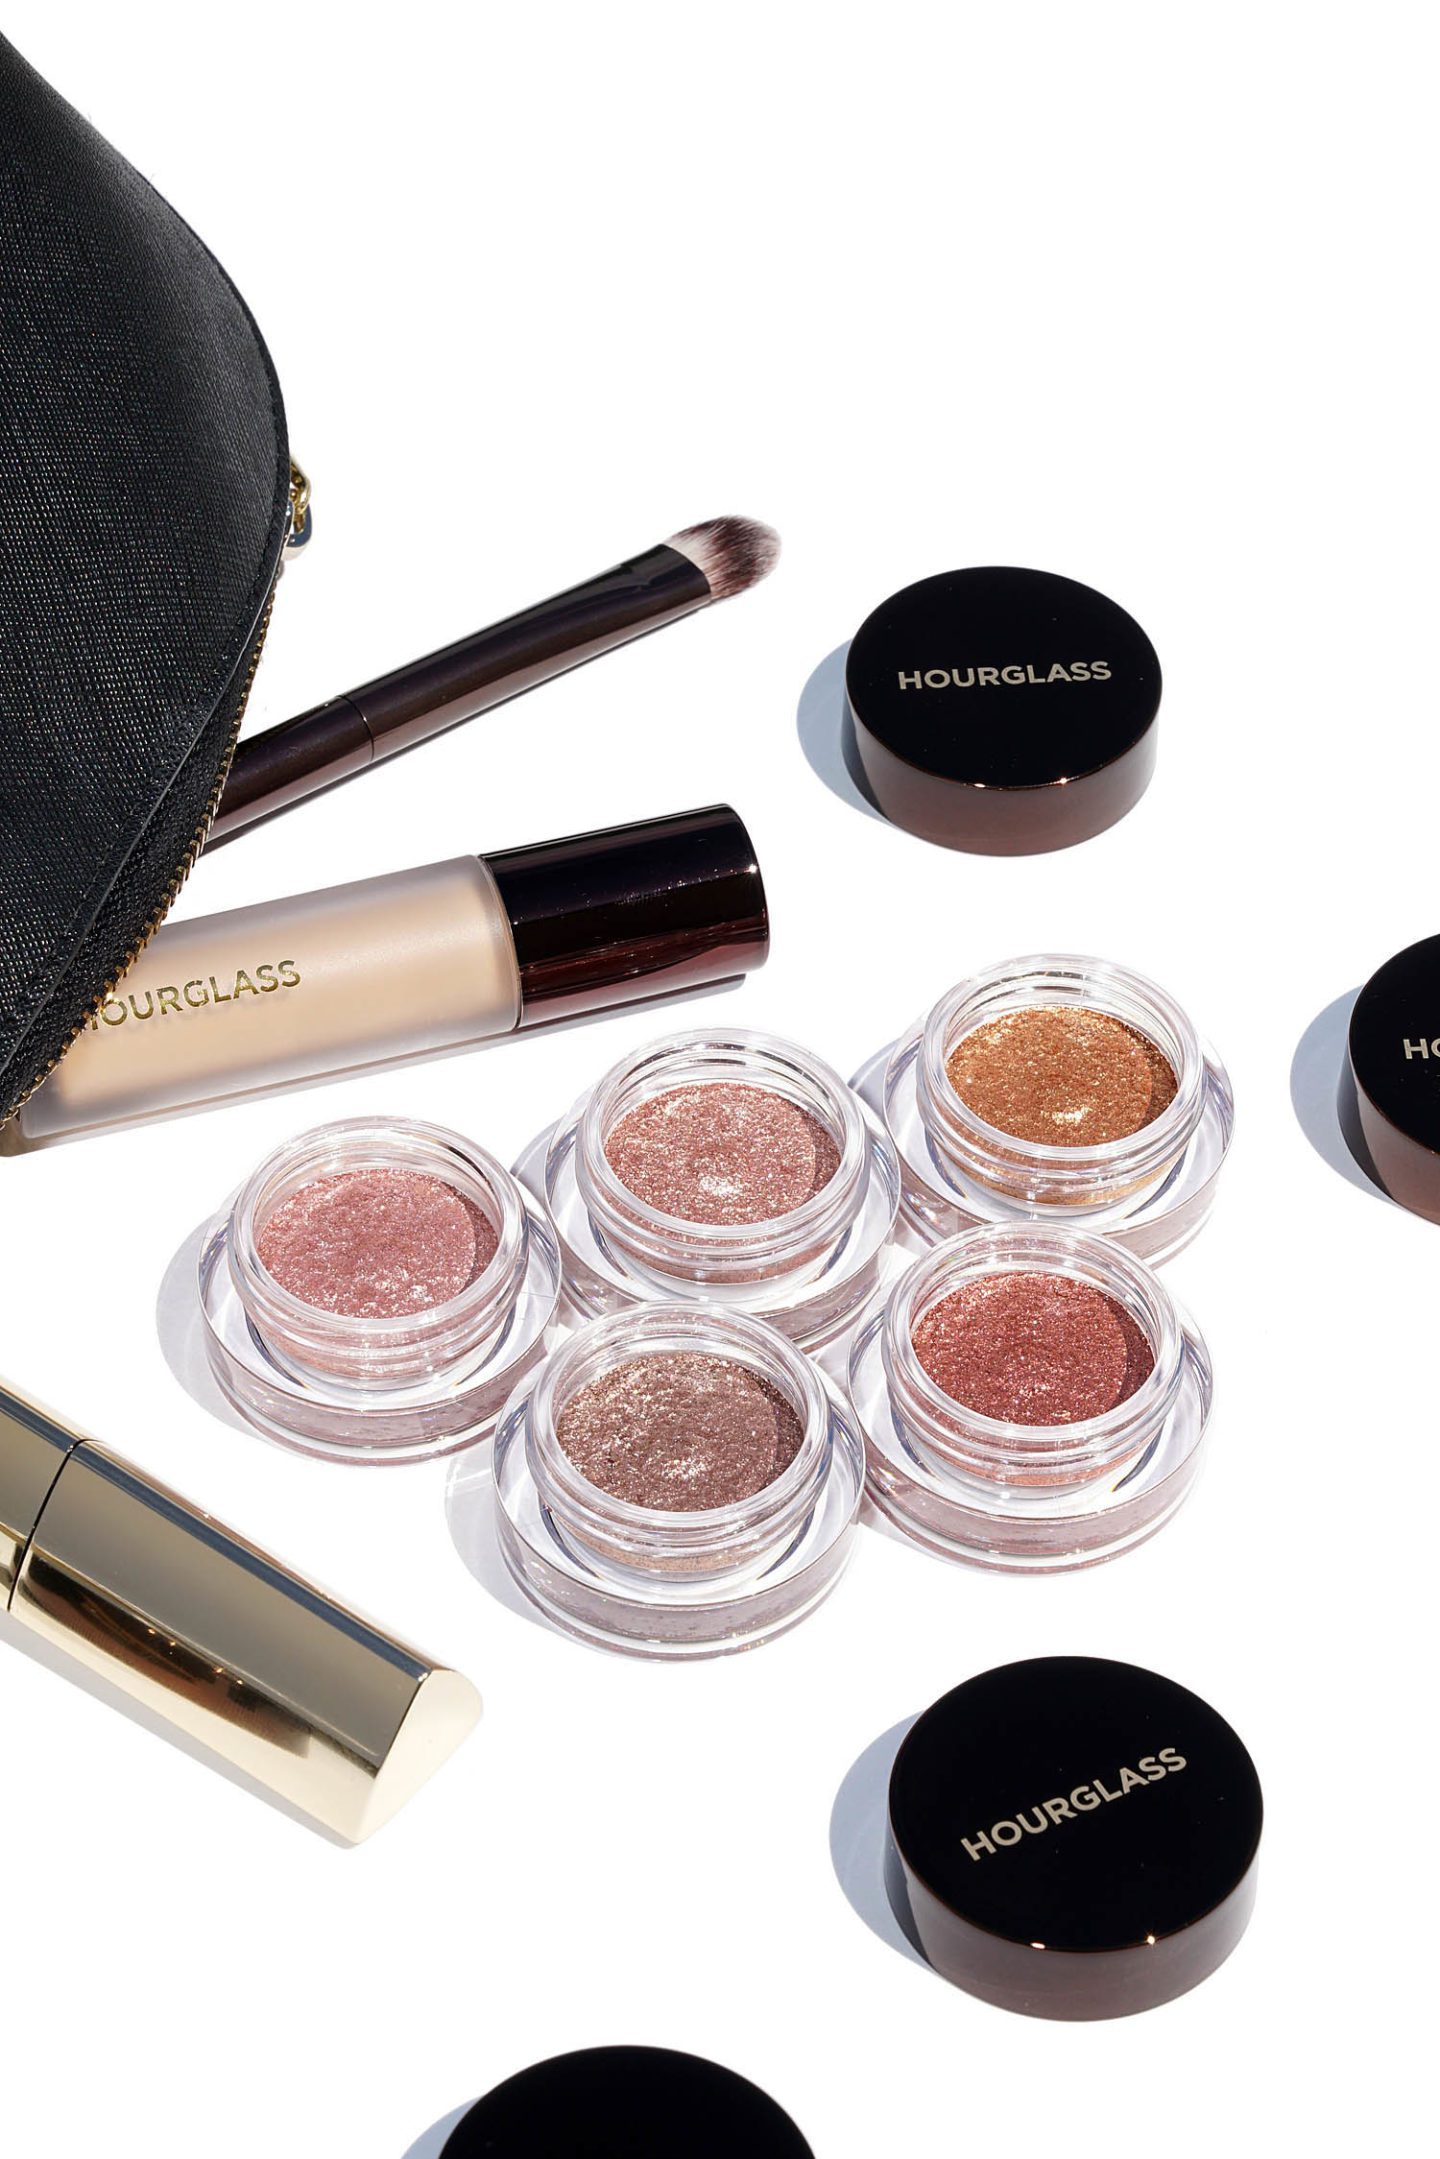 Hourglass Scattered Light swatches Aura, Reflect, Foil, Smoke and Blaze | The Beauty Look Book